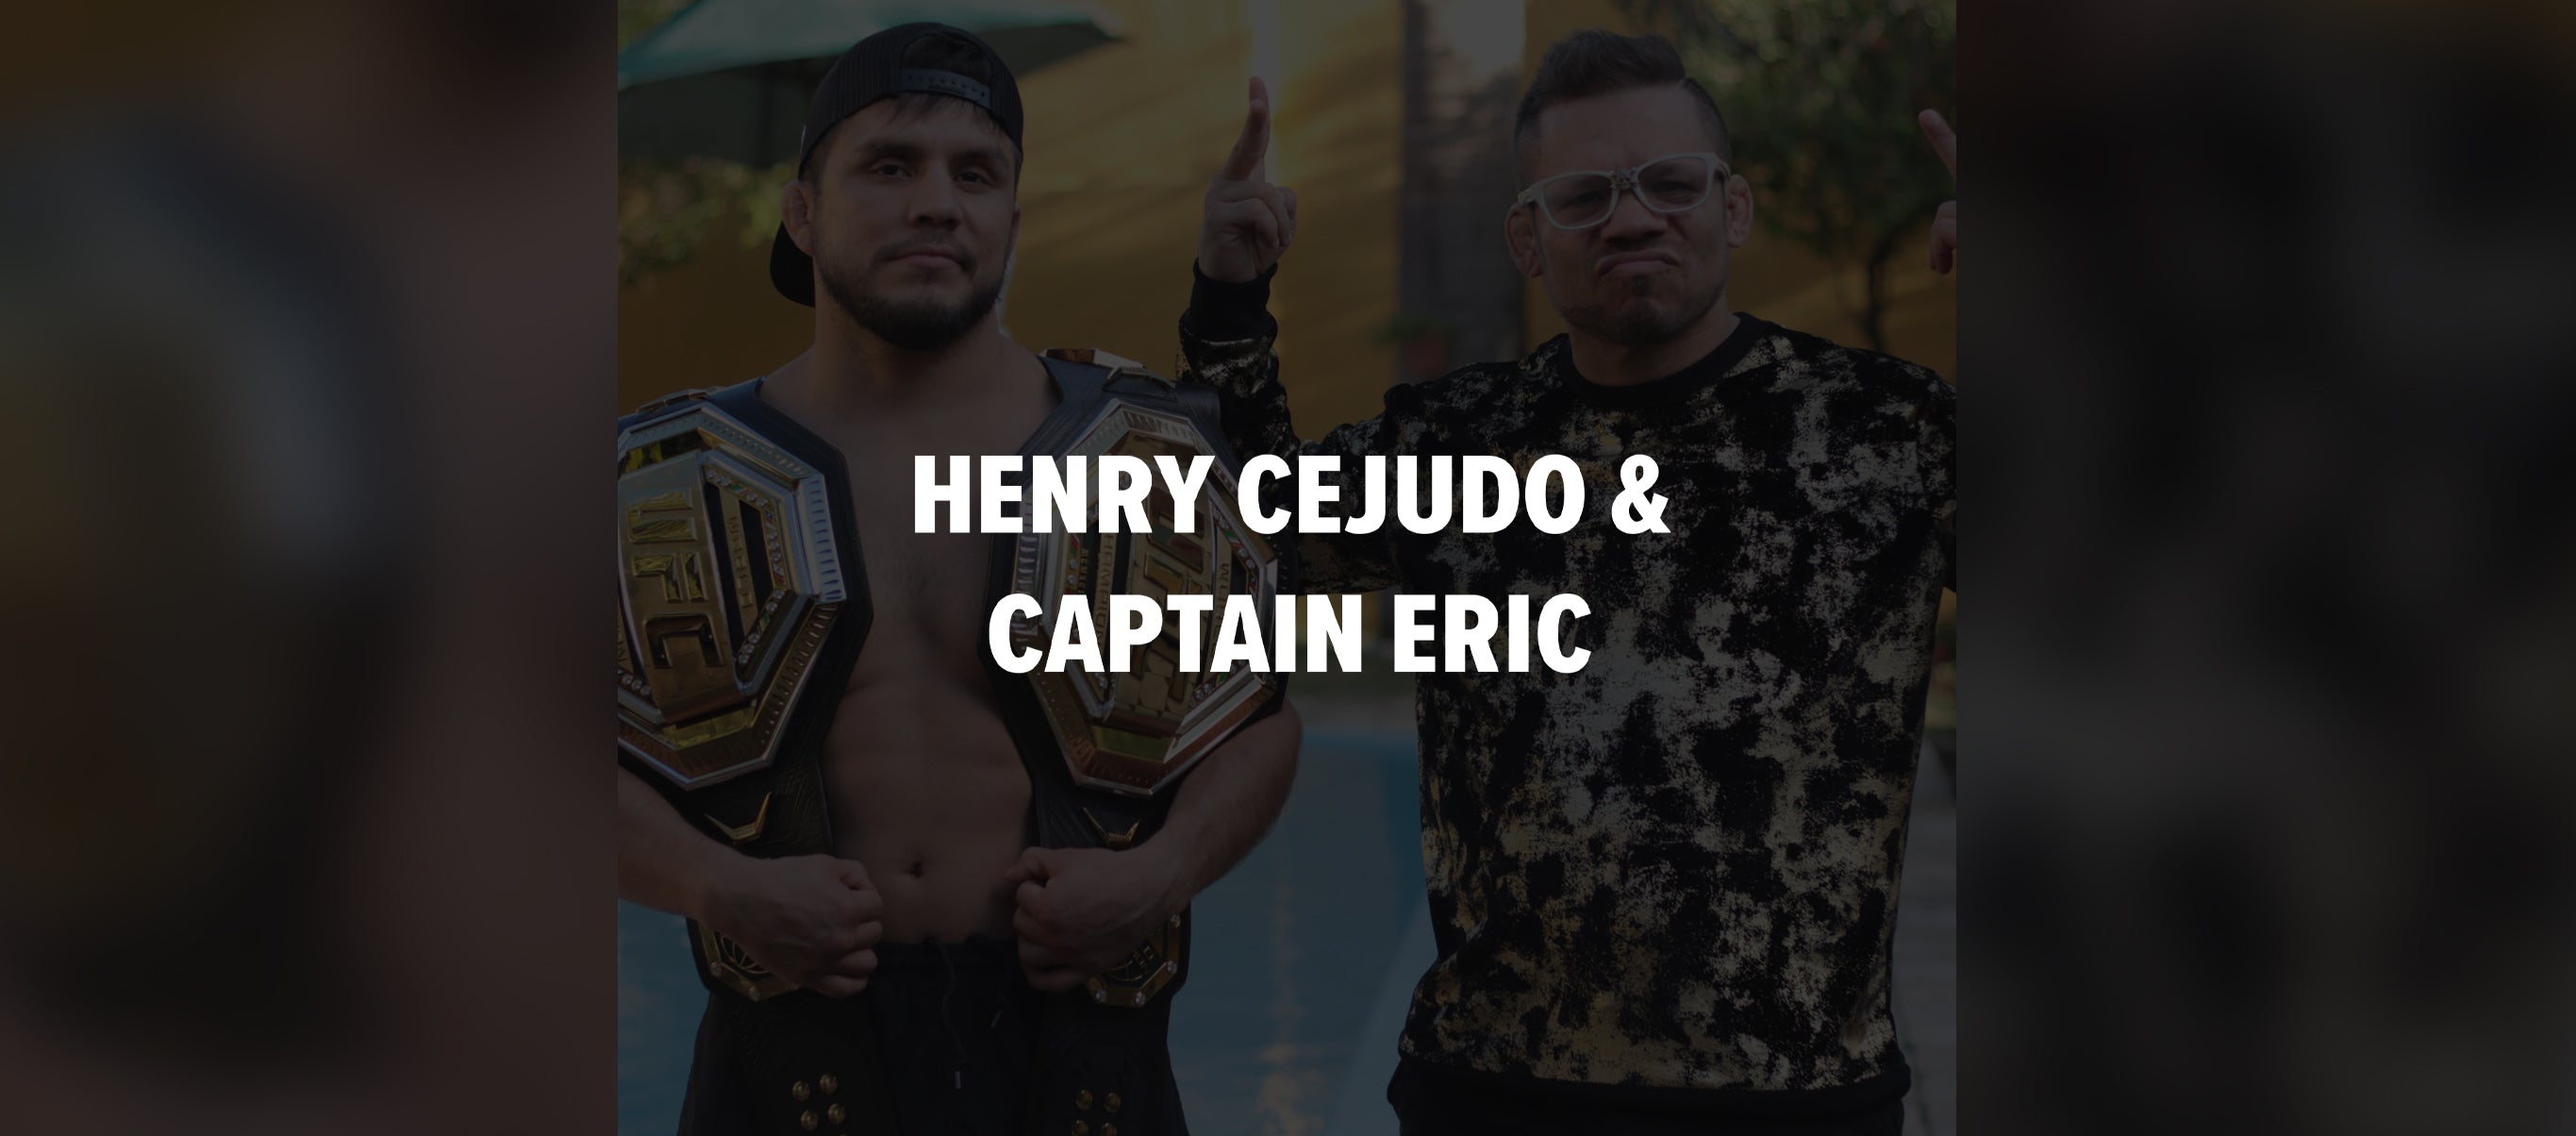 Henry Cejudo: Dominating Inside and Outside of the Ring